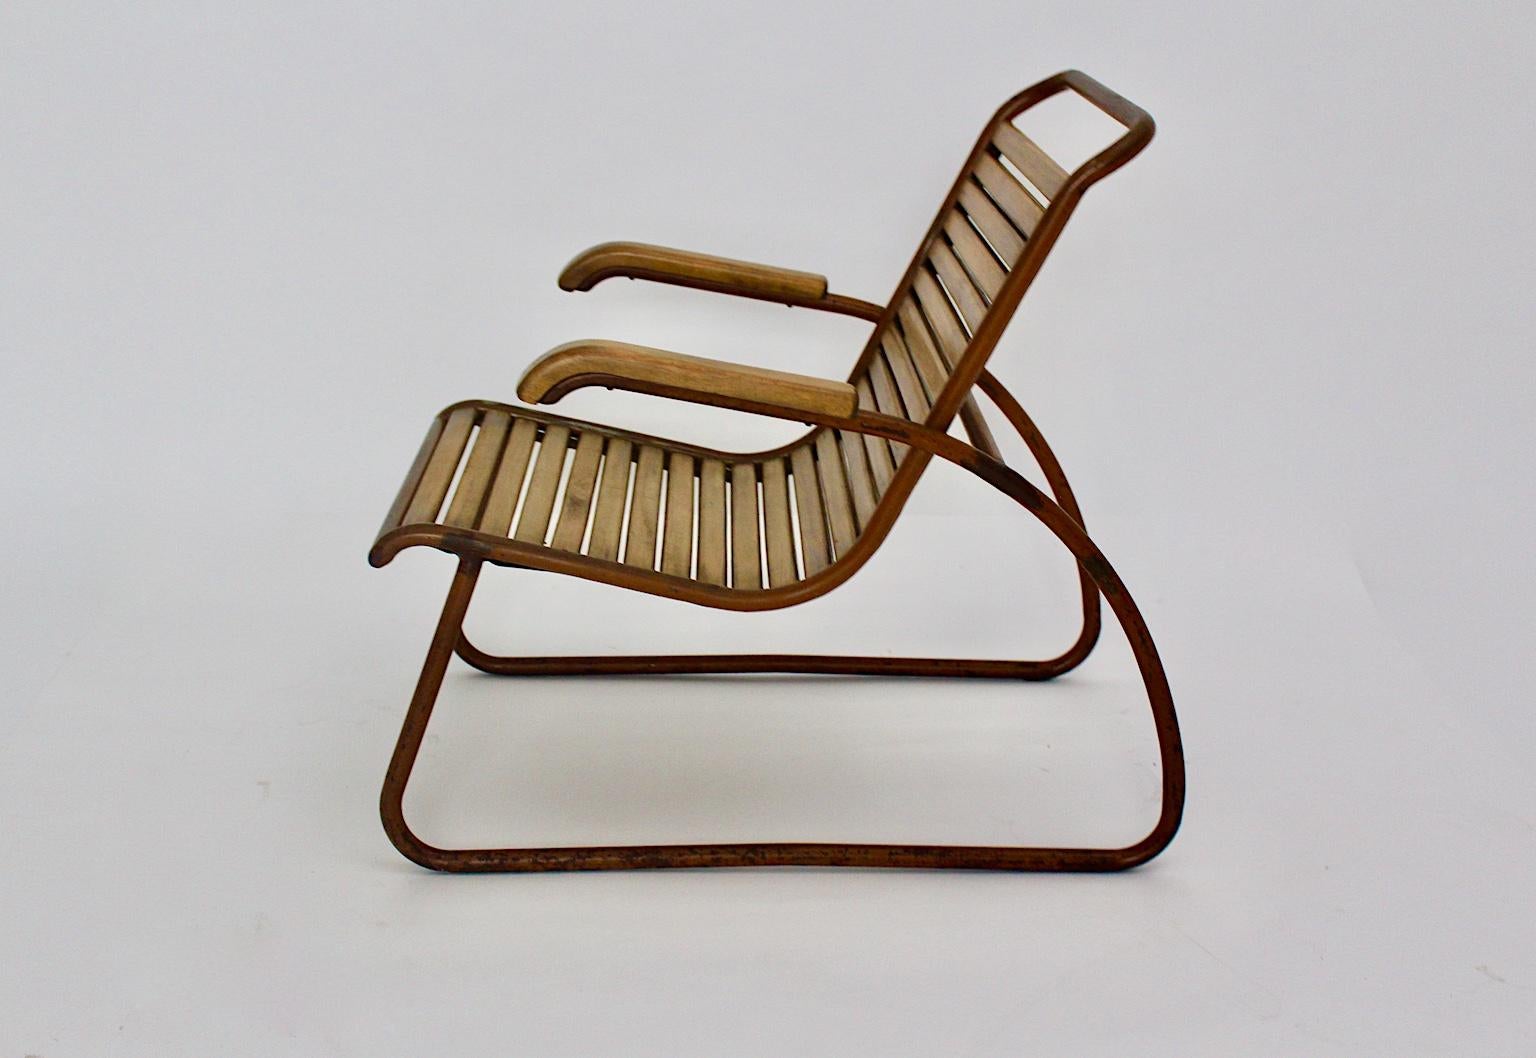 Bauhaus era vintage beech metal lounge chair or armchair, which was designed in the 1920s.
24 beechwood slats and a tube steel frame with nice color rests form this extraordinary lounge chair. A beautiful curved shape and a sleek line features the